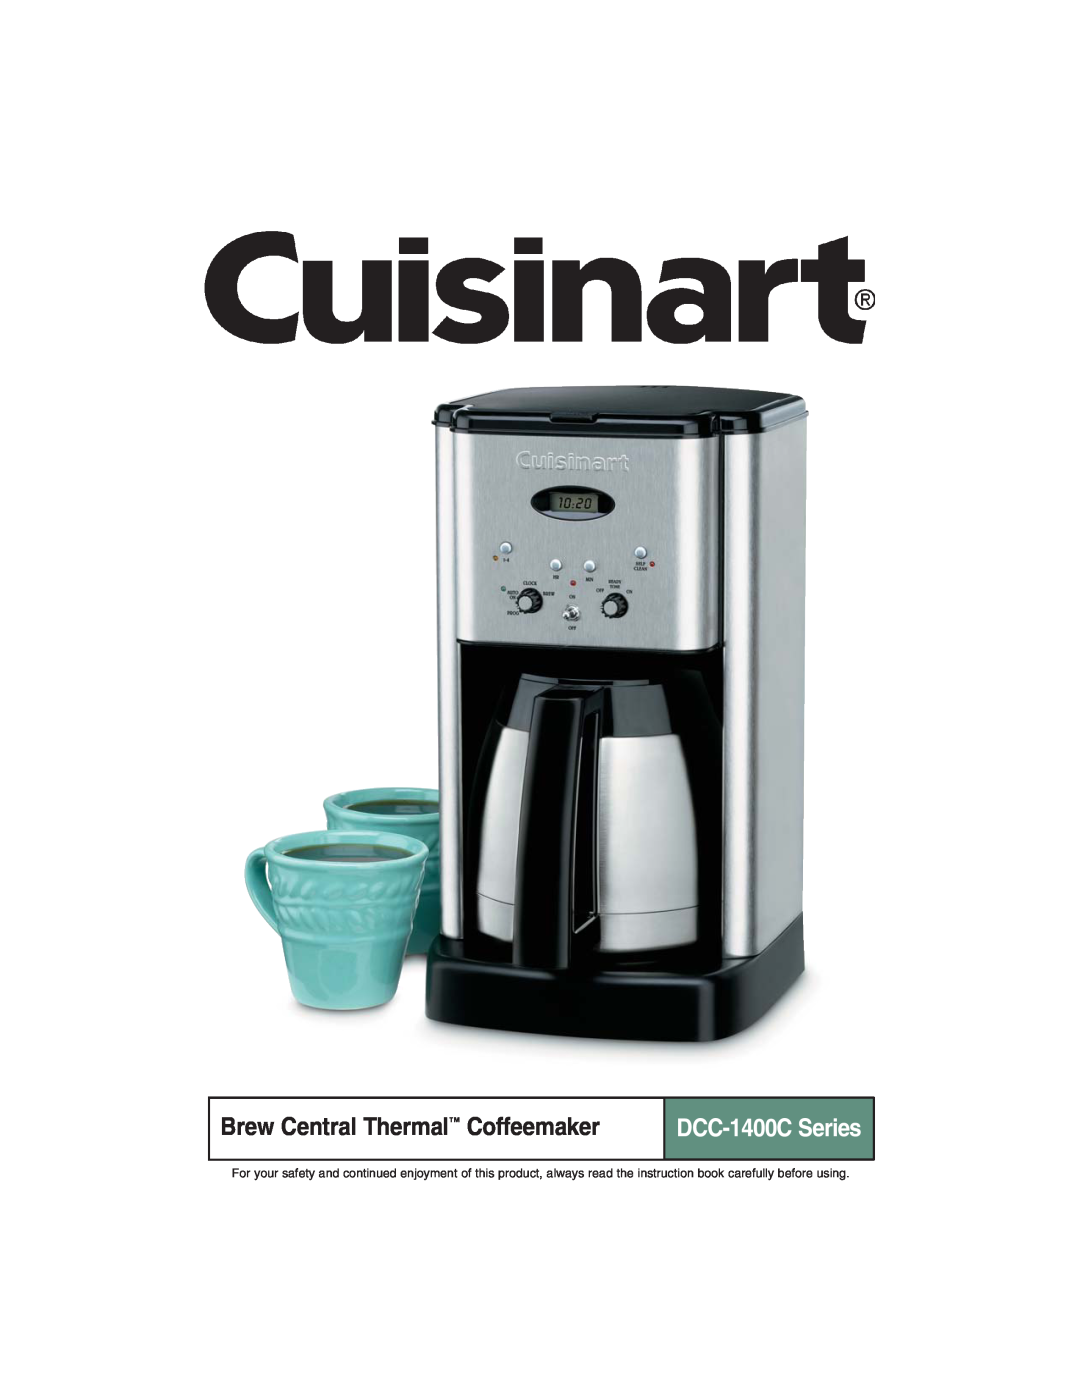 Cuisinart manual Brew Central Thermal Coffeemaker, DCC-1400C Series 